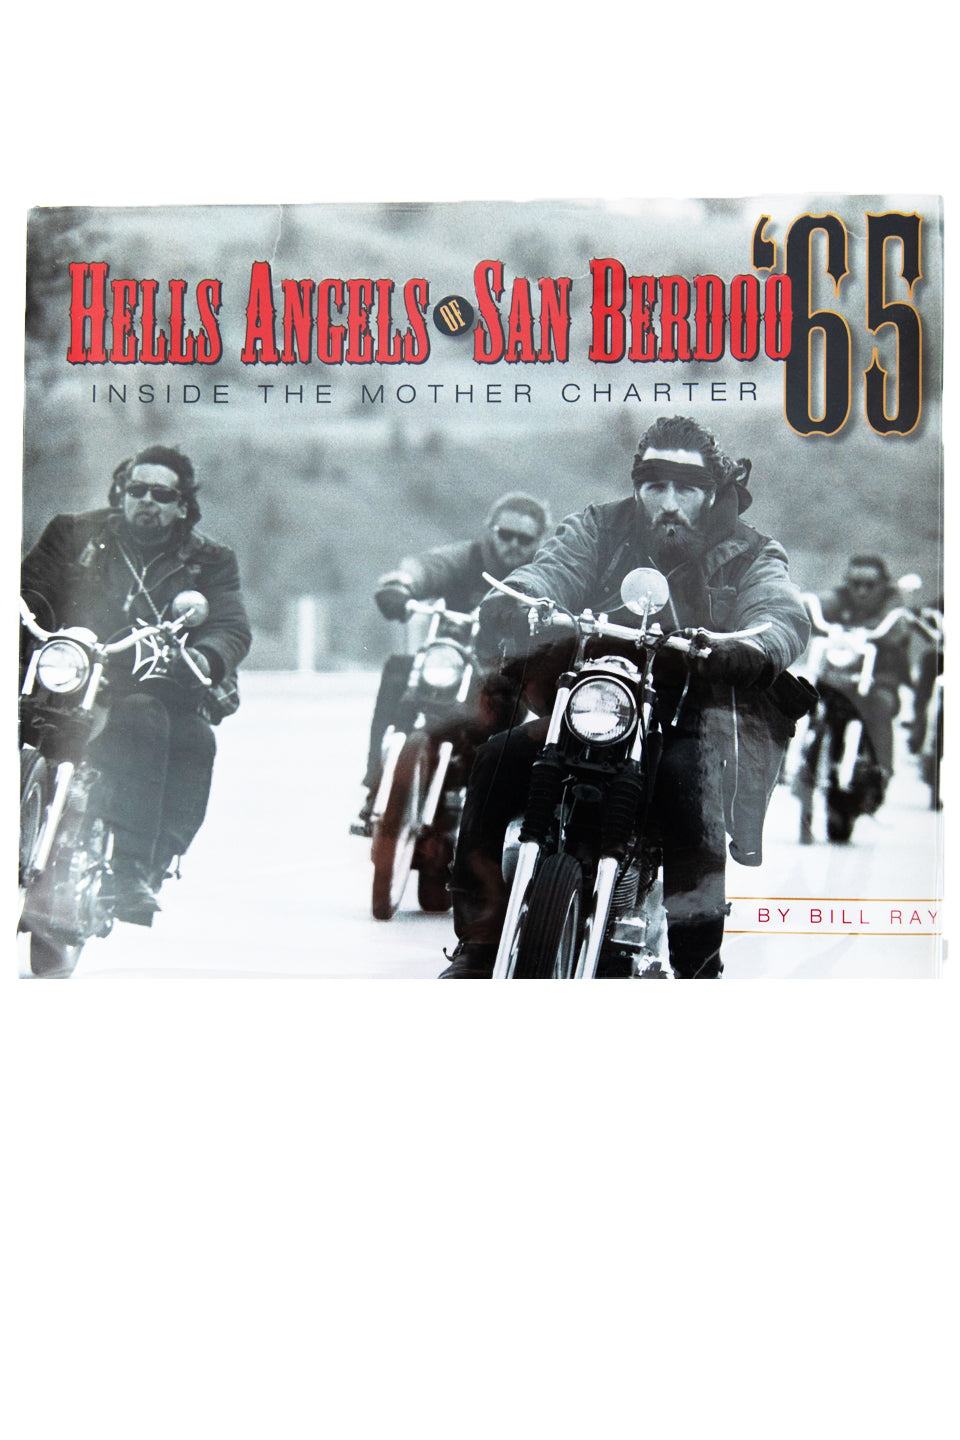 HELLS ANGELS OF BERDOO '65 | Inside The Mother Chapter